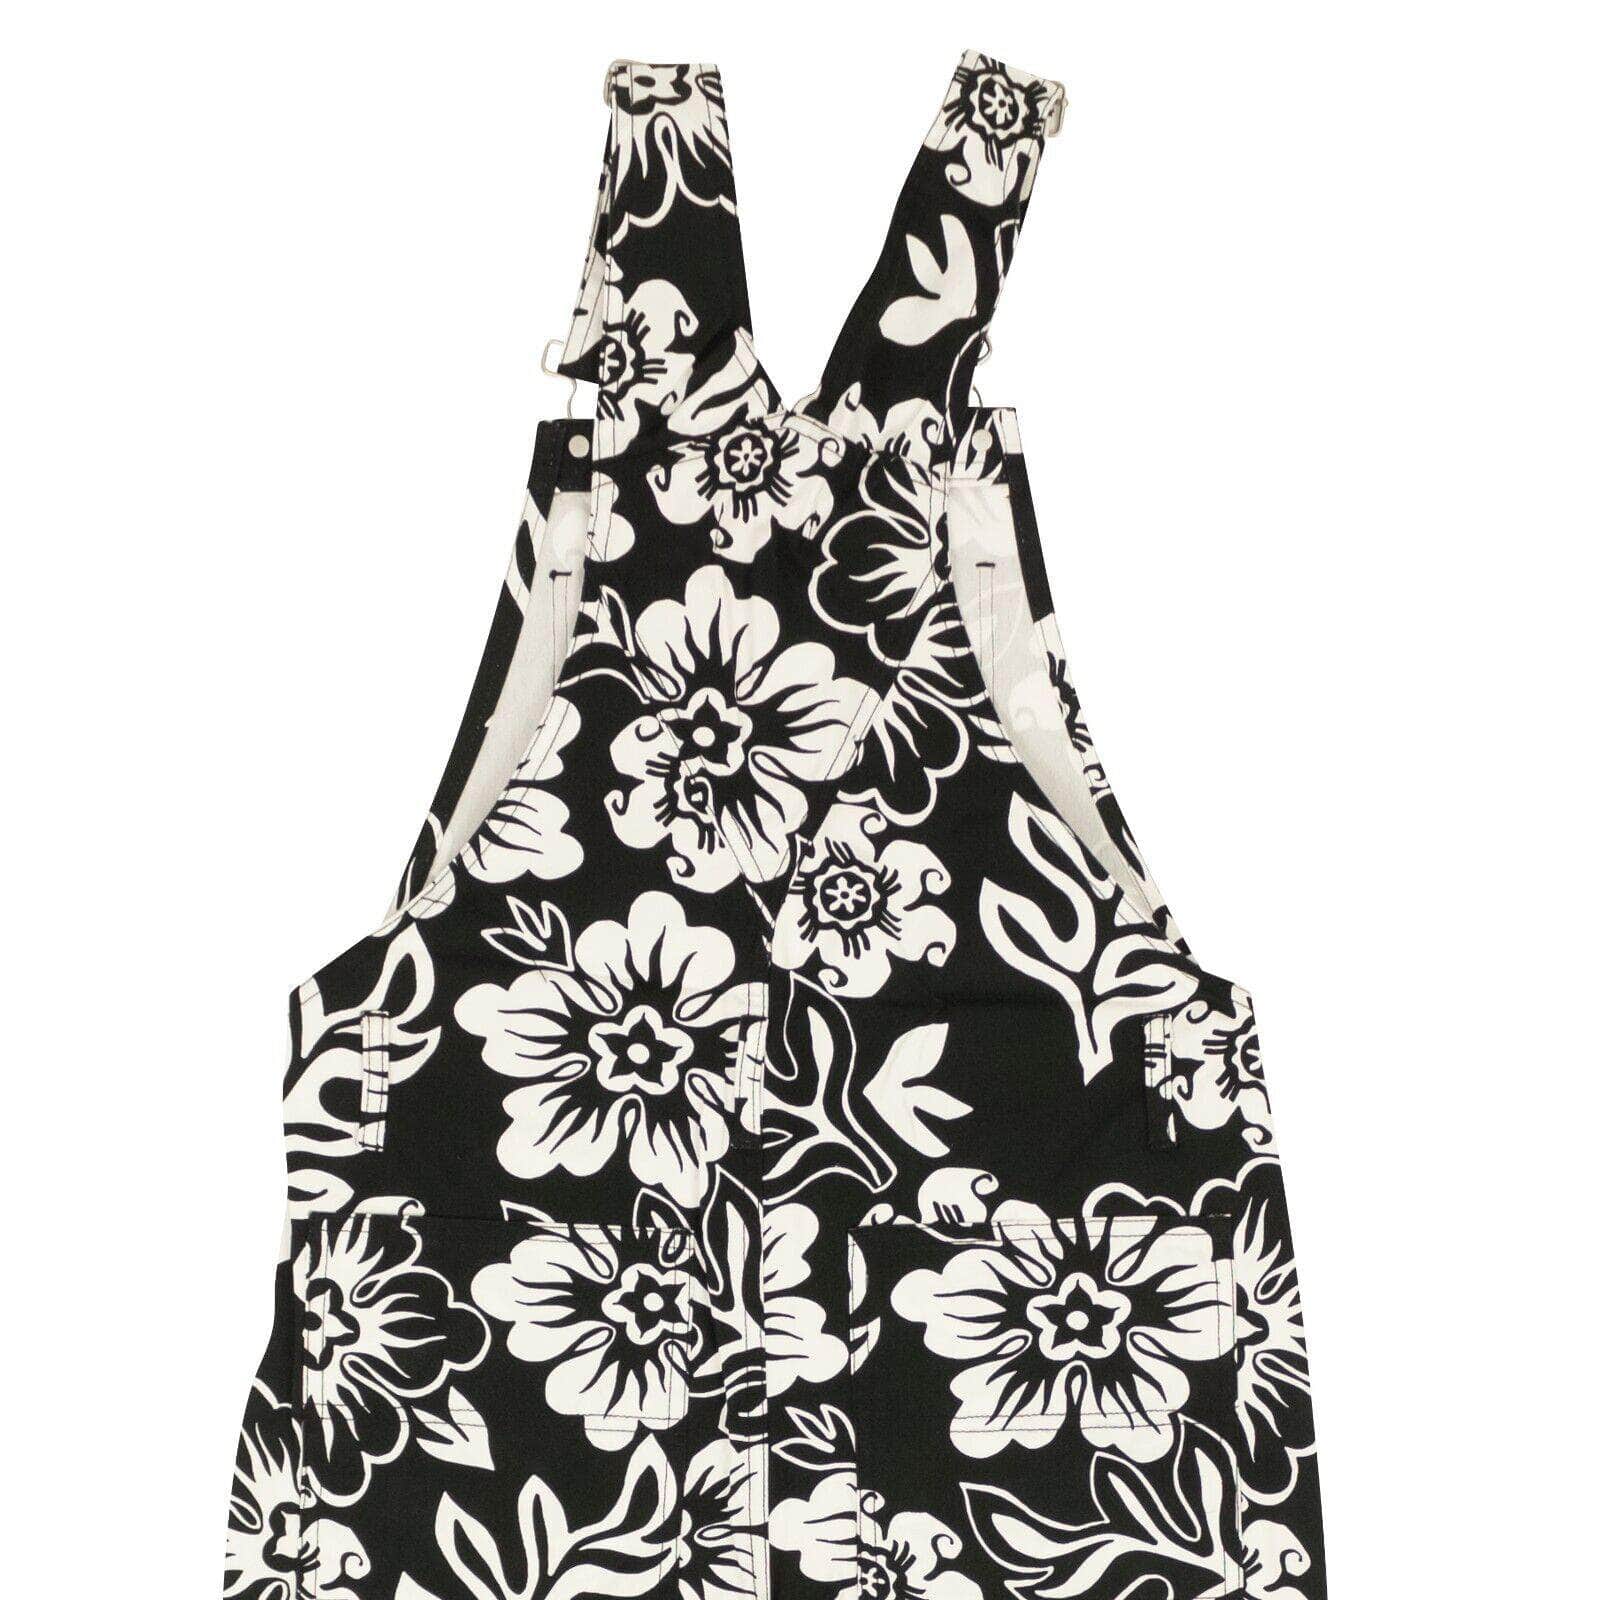 Stussy channelenable-all, chicmi, couponcollection, gender-womens, main-clothing, size-3, size-5, size-7, size-9, stussy, under-250, womens-jumpsuits-rompers Black Cotton Perri All Over Floral Print Overalls